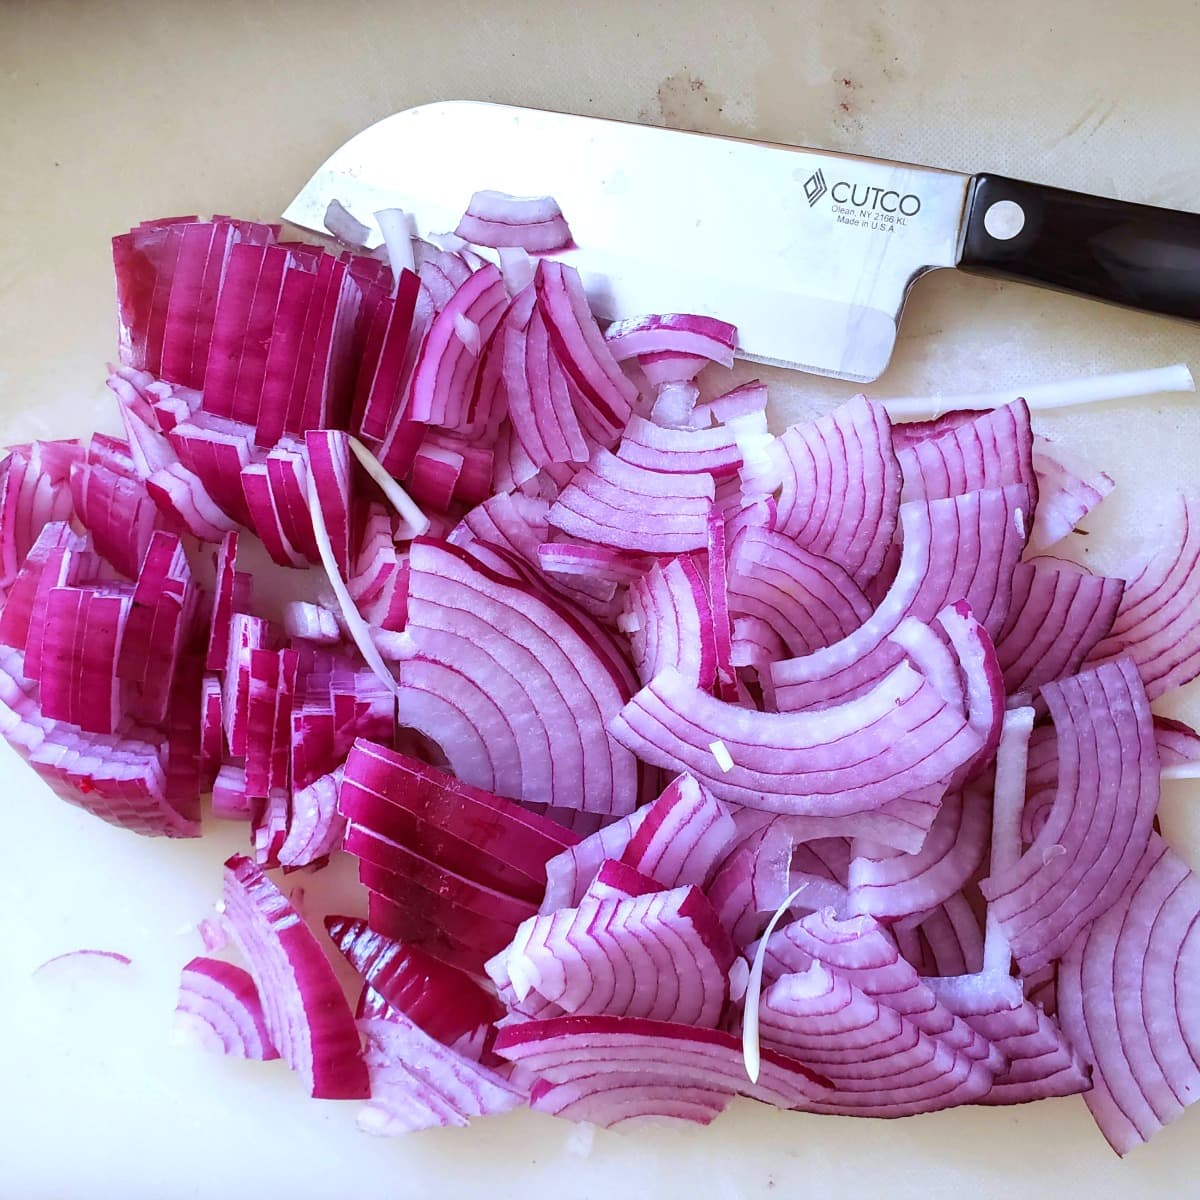 Slicing red onions on a cutting board